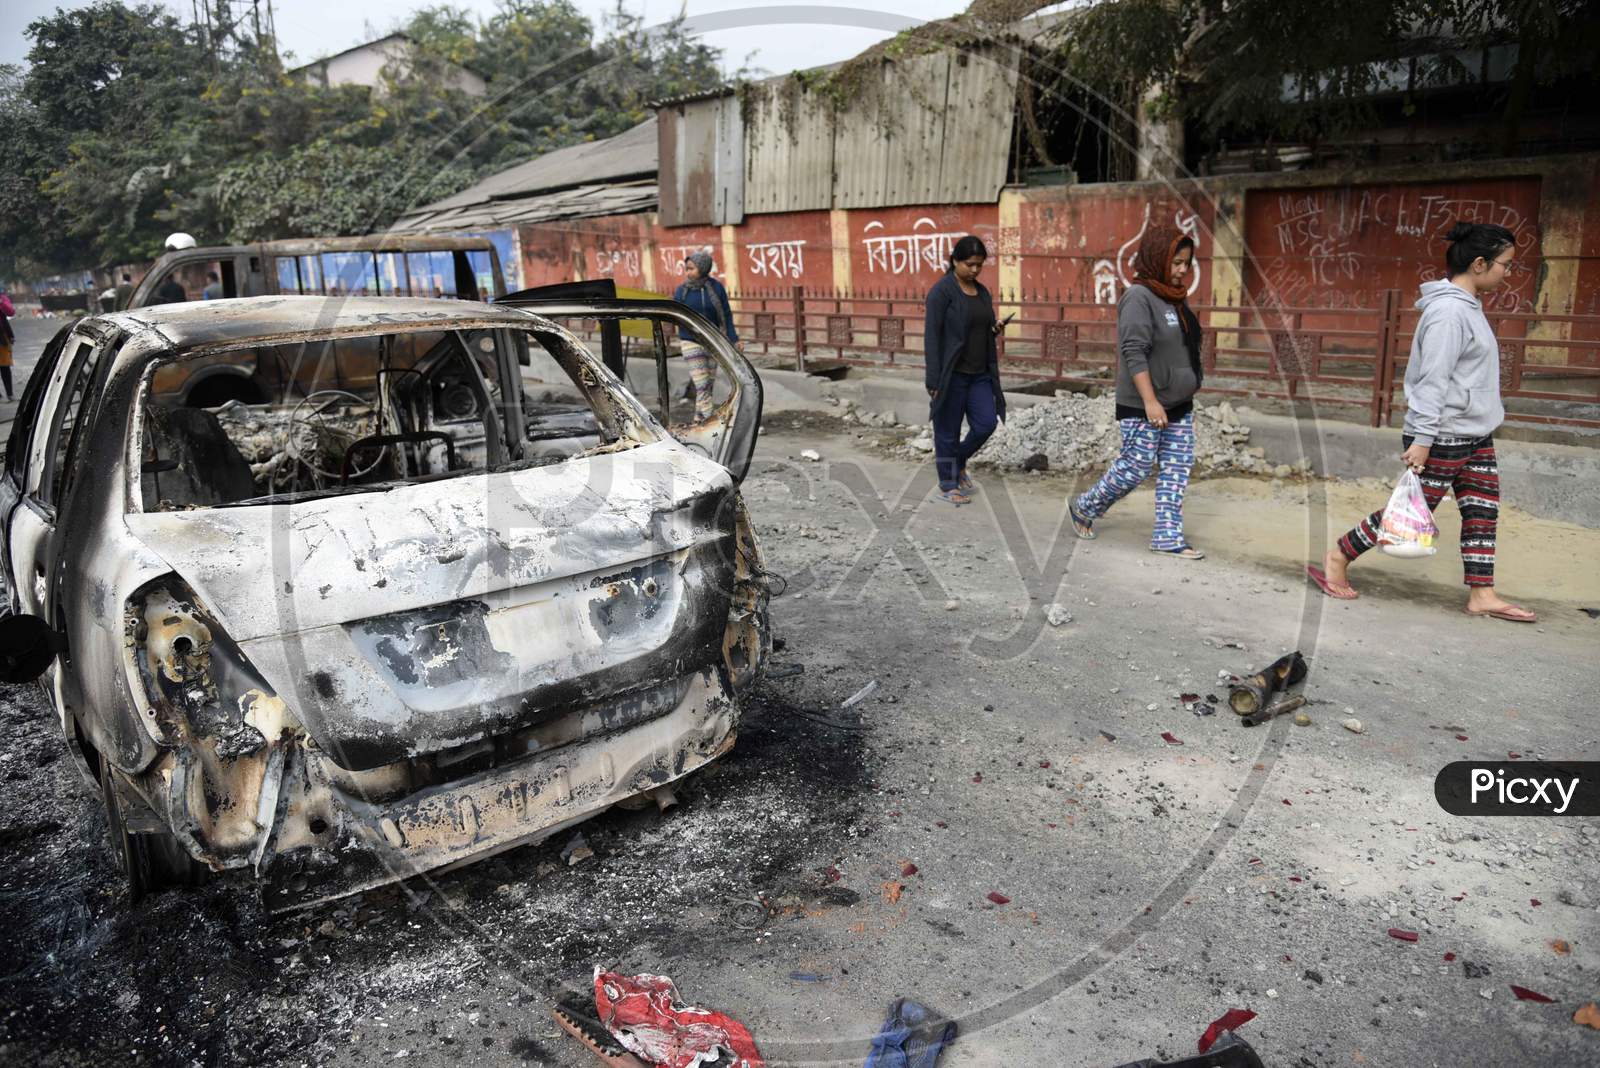 A Charred Vehicle Which Was Reportedly Set On Fire By The Protestors During A Demonstration Against The Citizenship Amendment Bill, In Guwahati